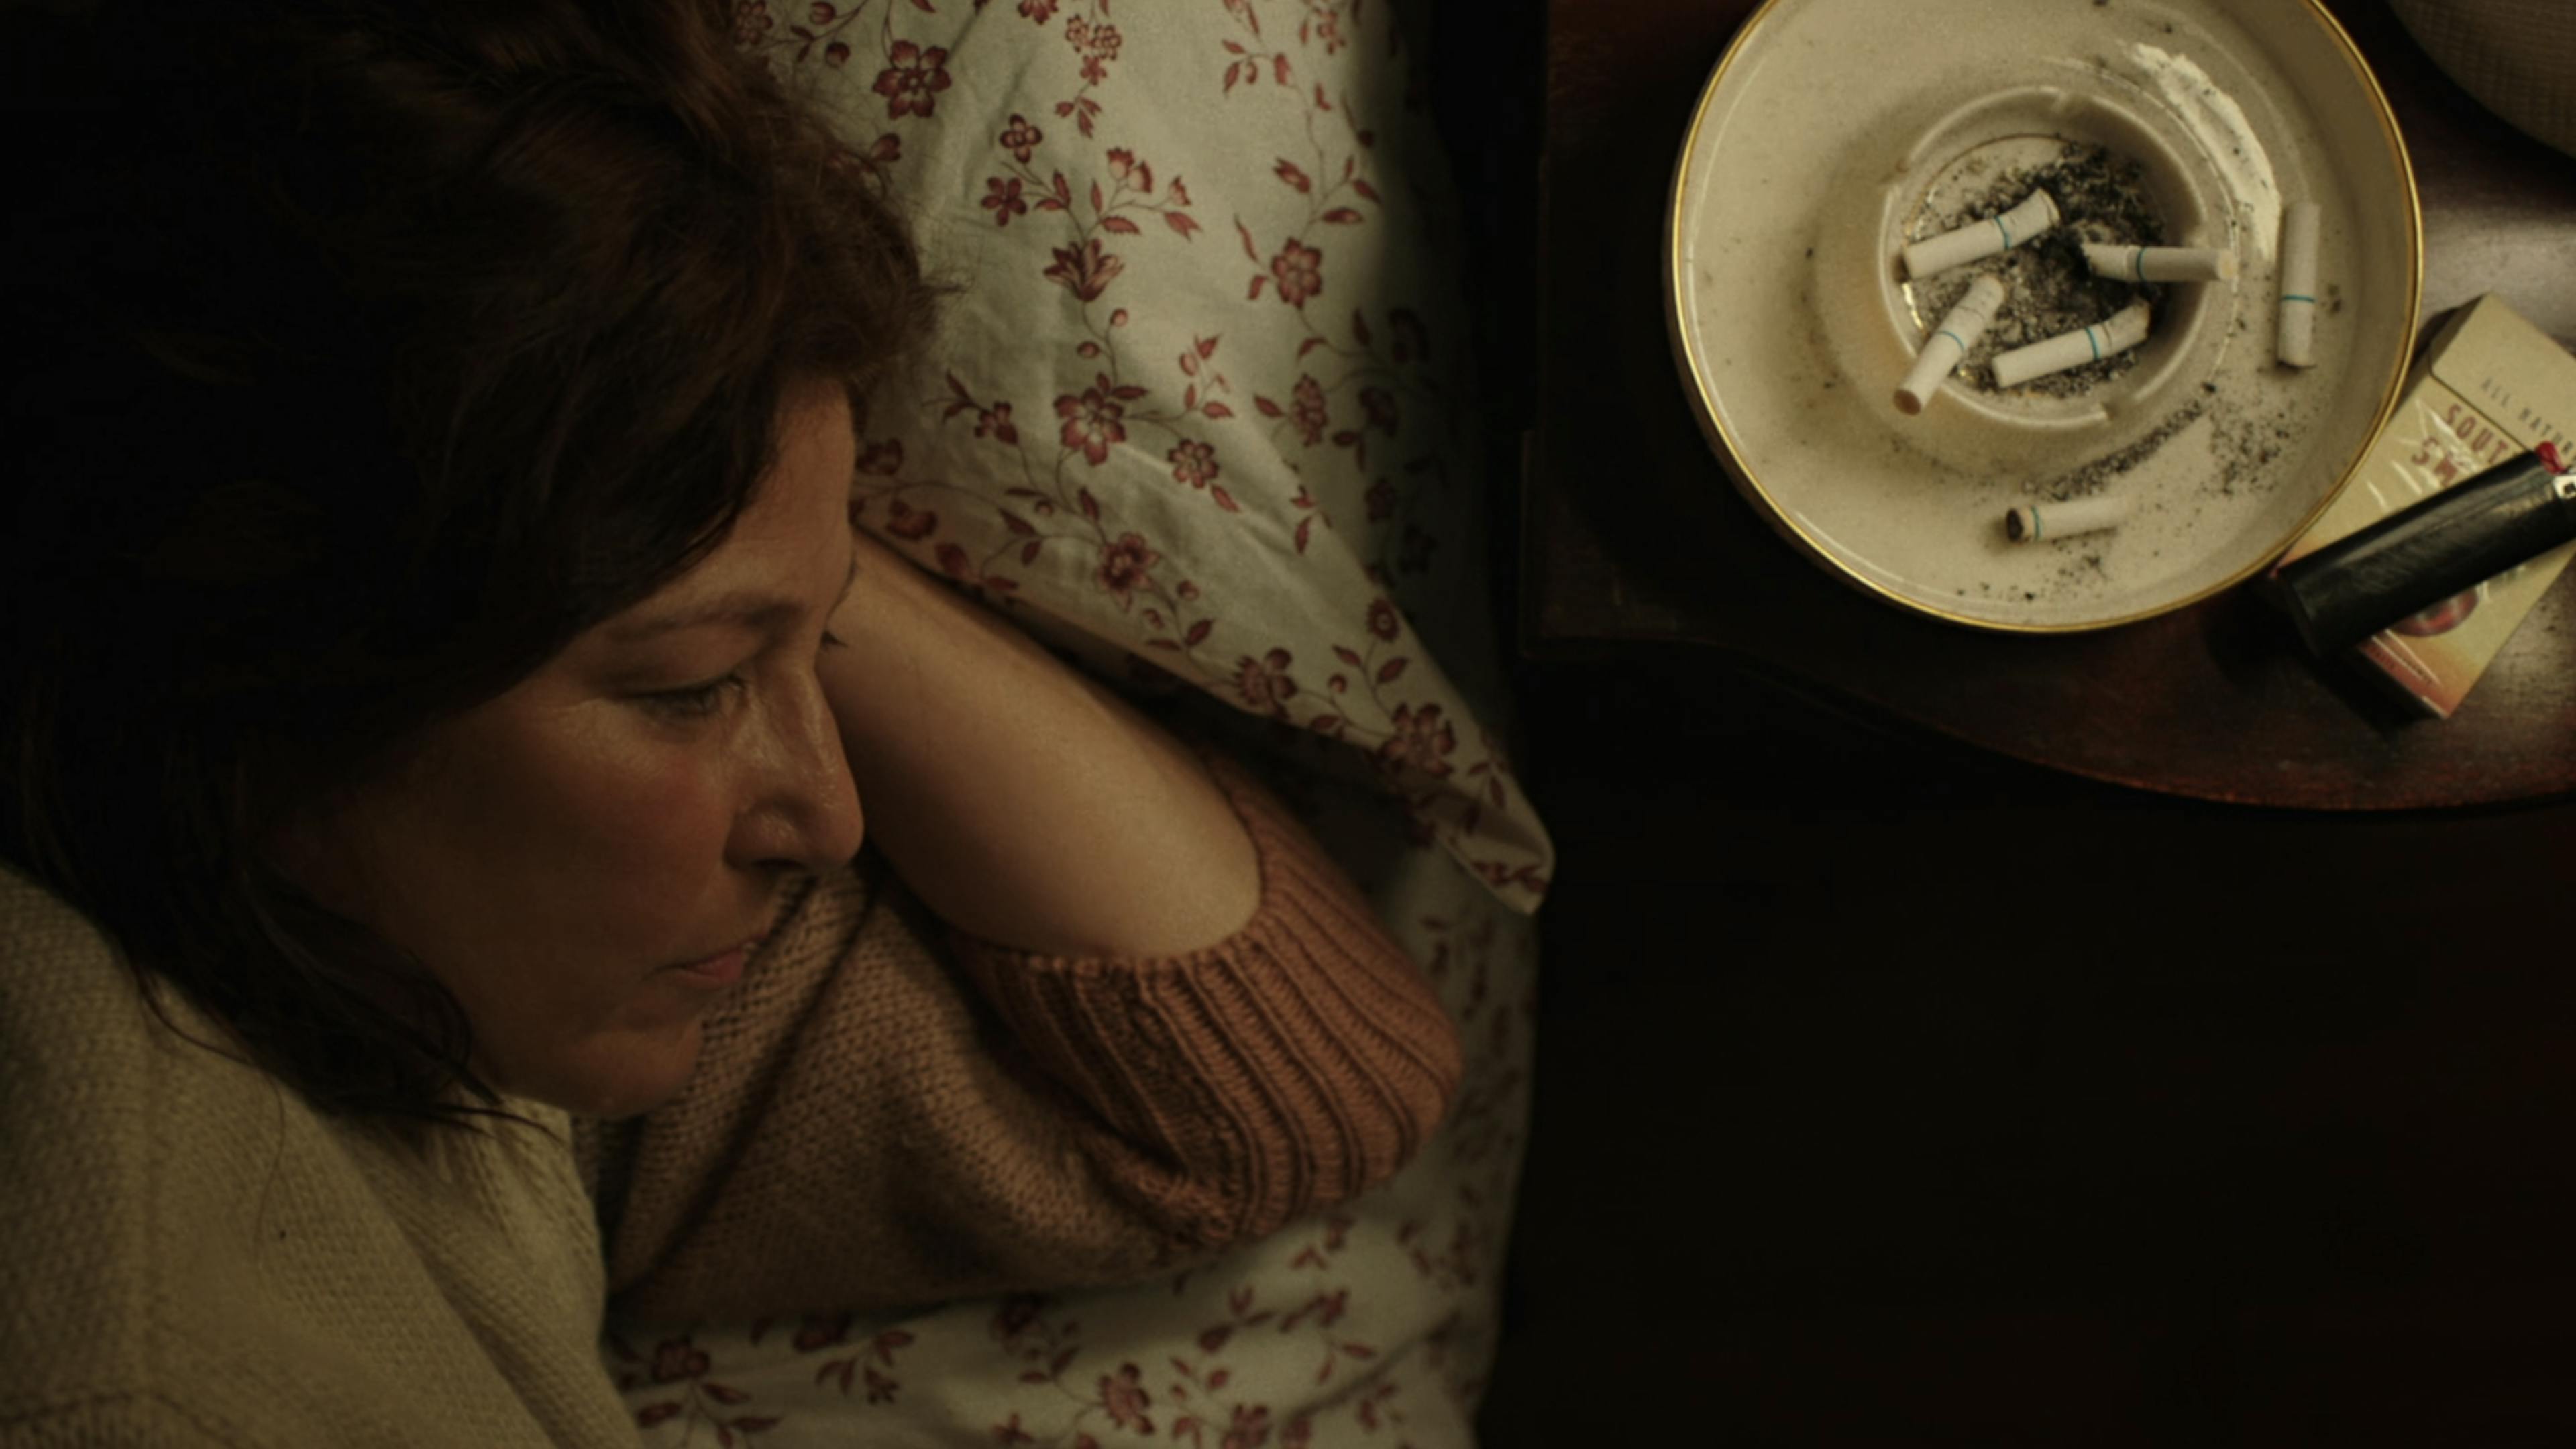 A woman lies in bed next to an ashtray with cigarettes